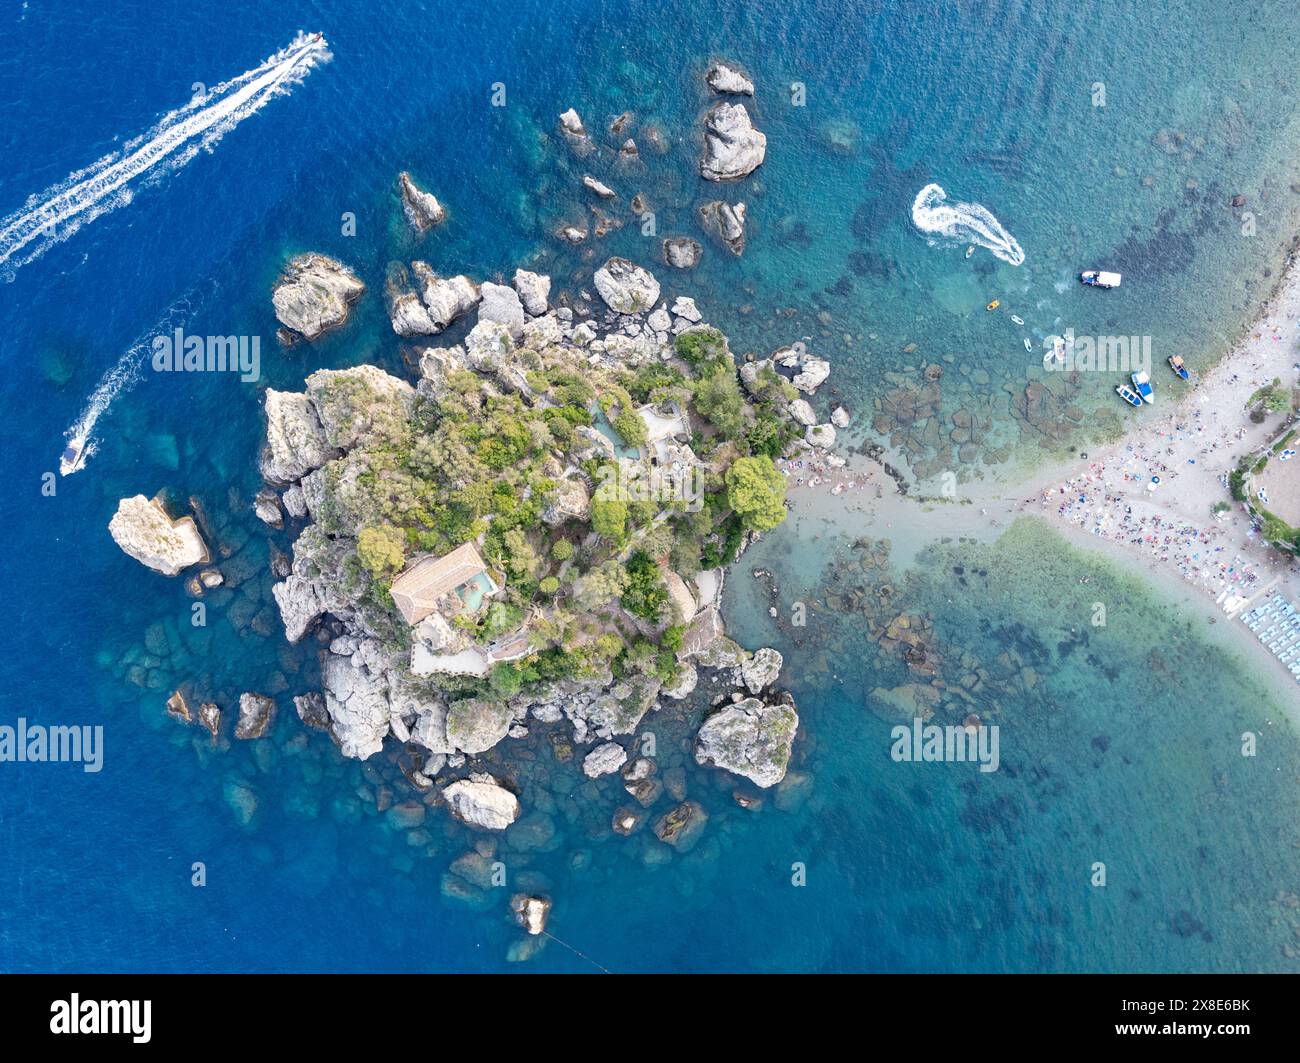 Aerial view of the beach and island Isola Bella at Taormina, Sicily Stock Photo